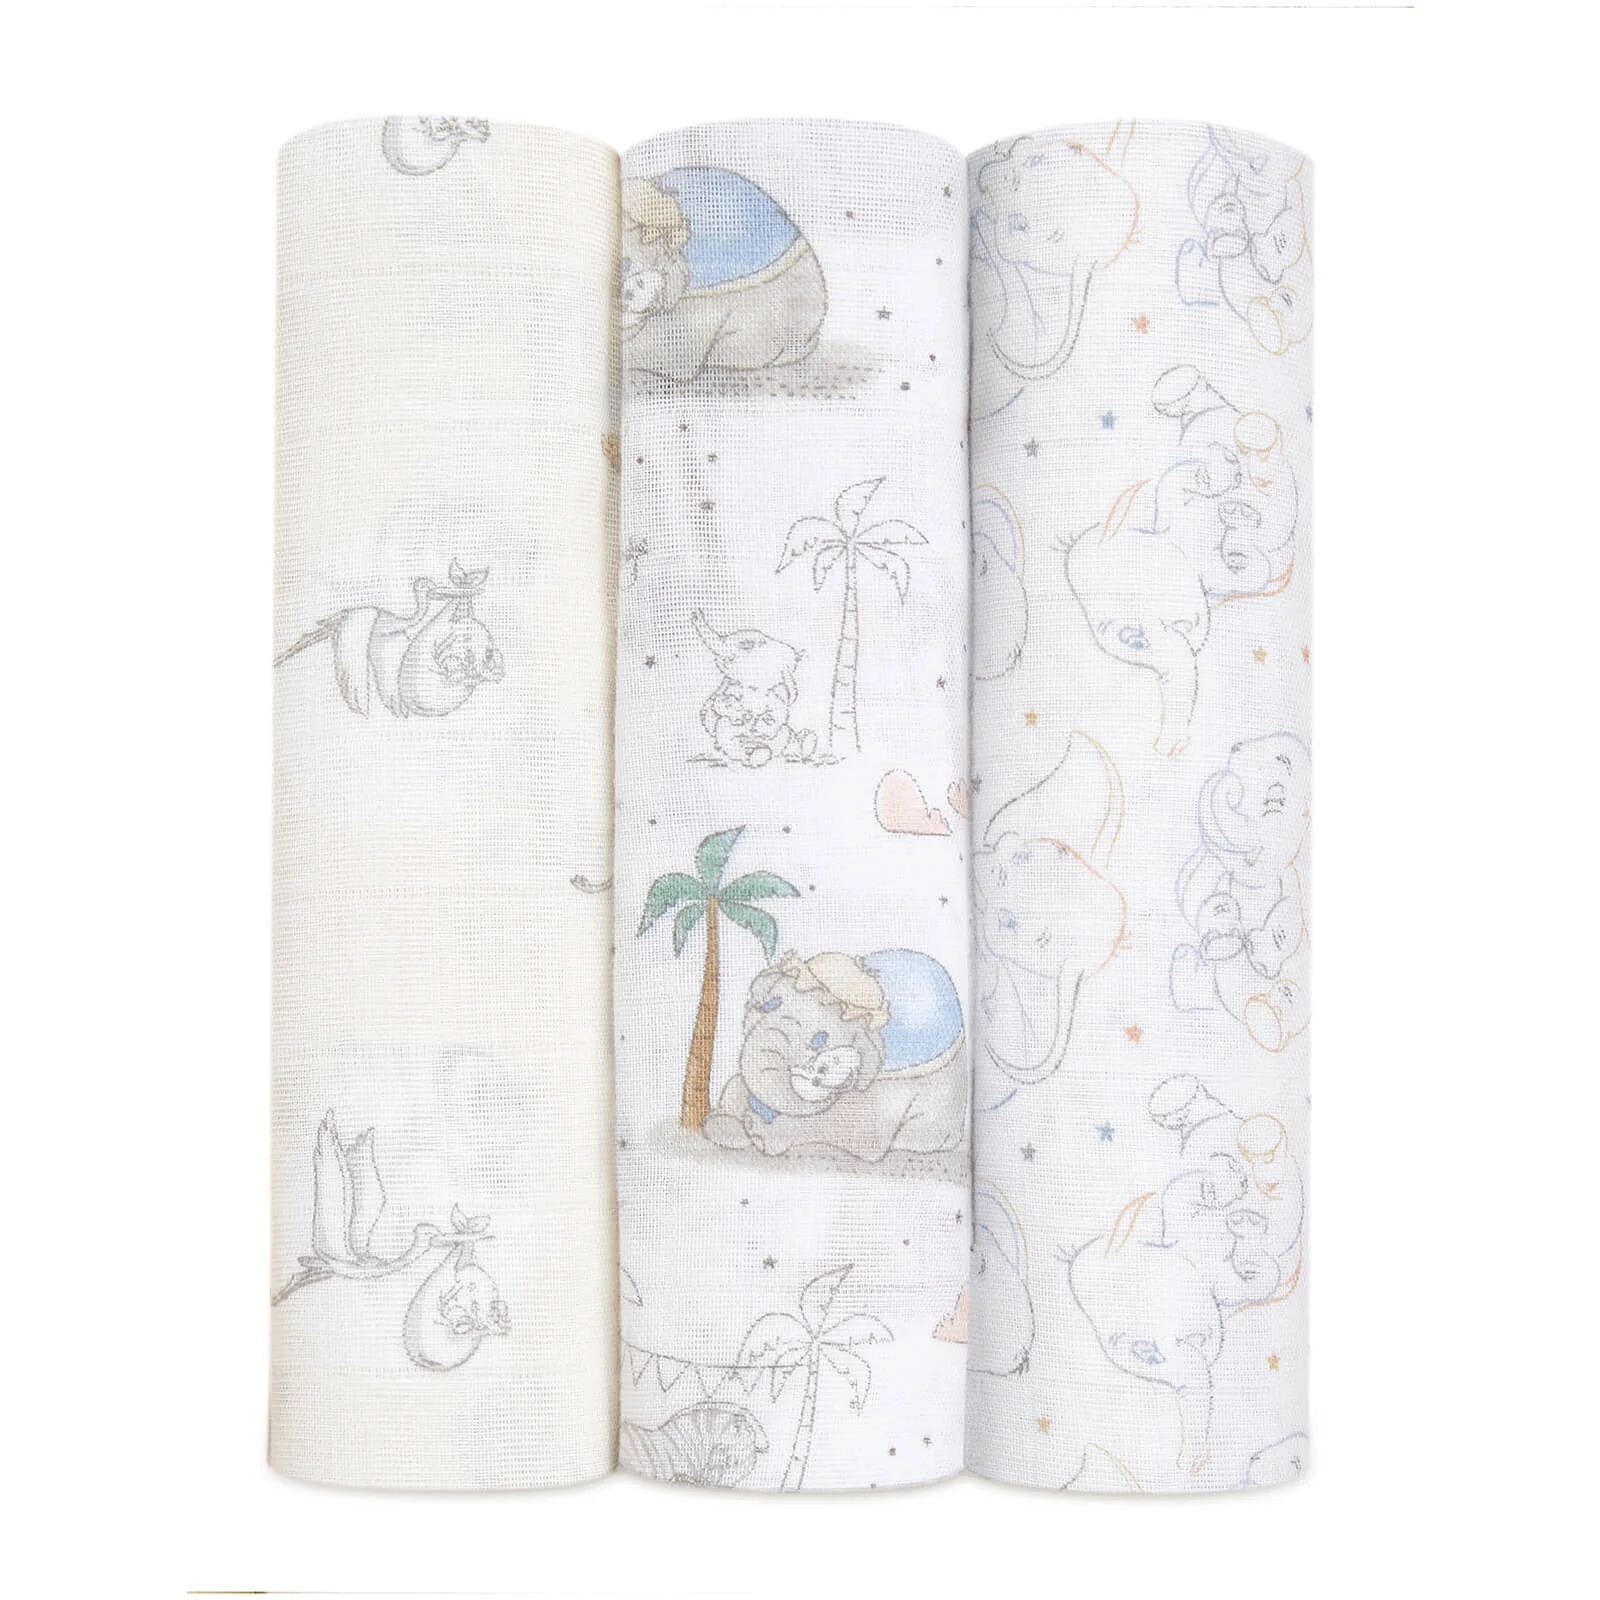 aden + anais Classic Swaddles - My Darling Dumbo (3 Pack) Image 1